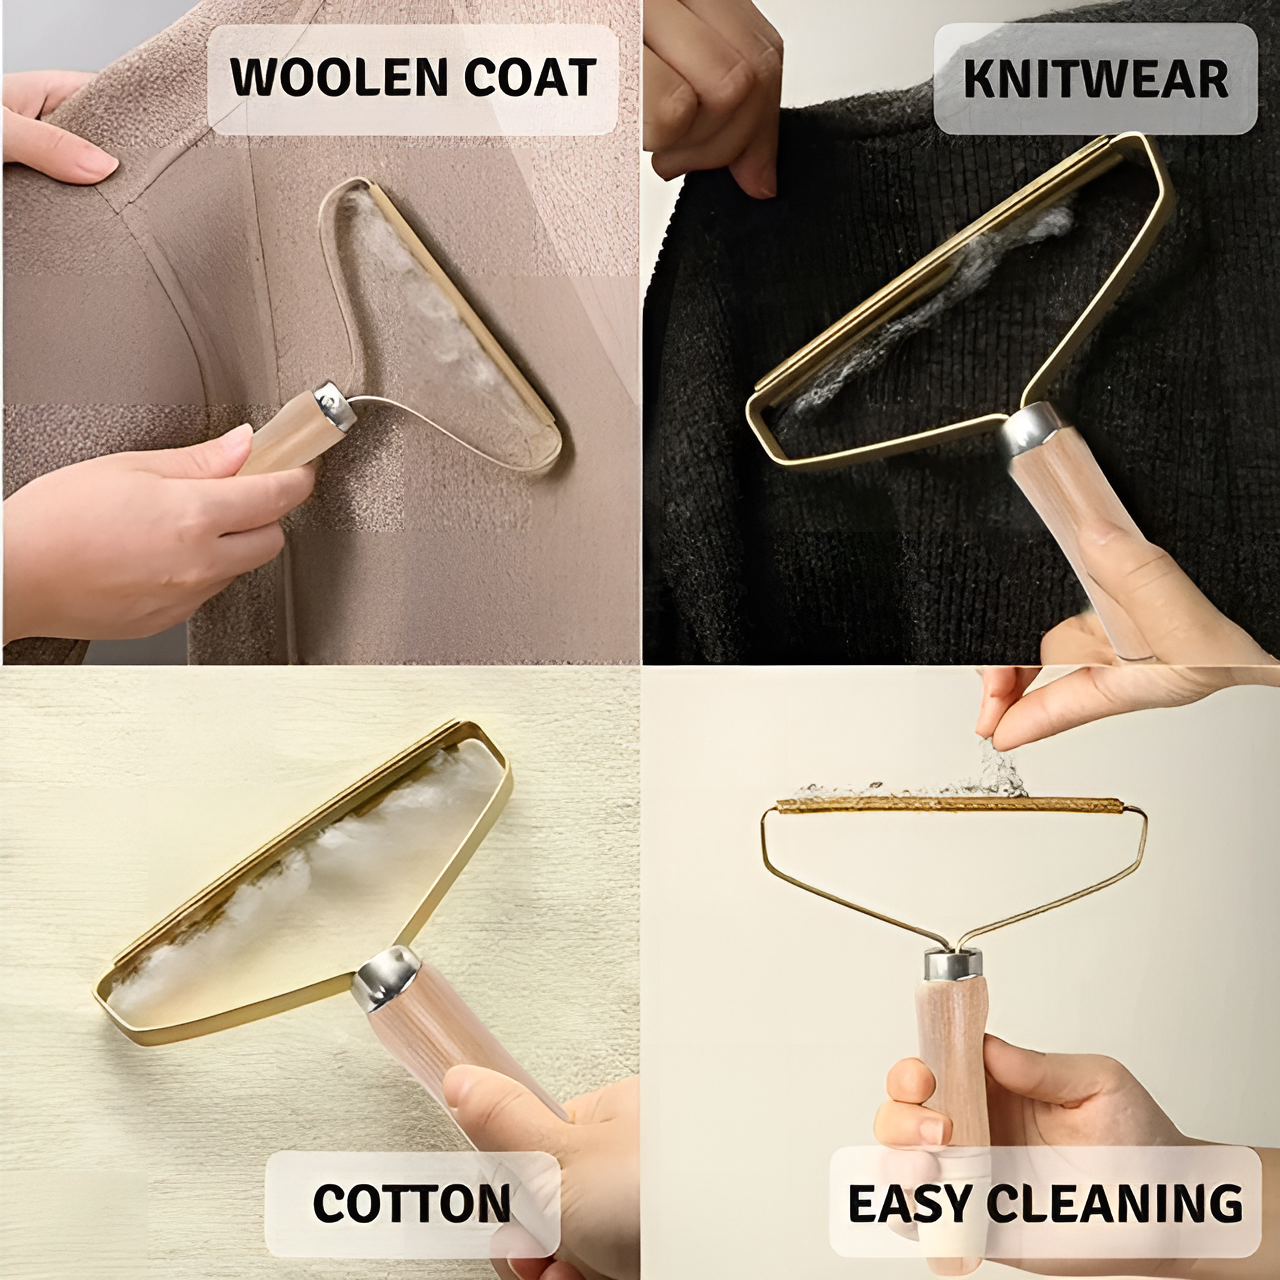 Pet Hair Remover For Any Clothing Material